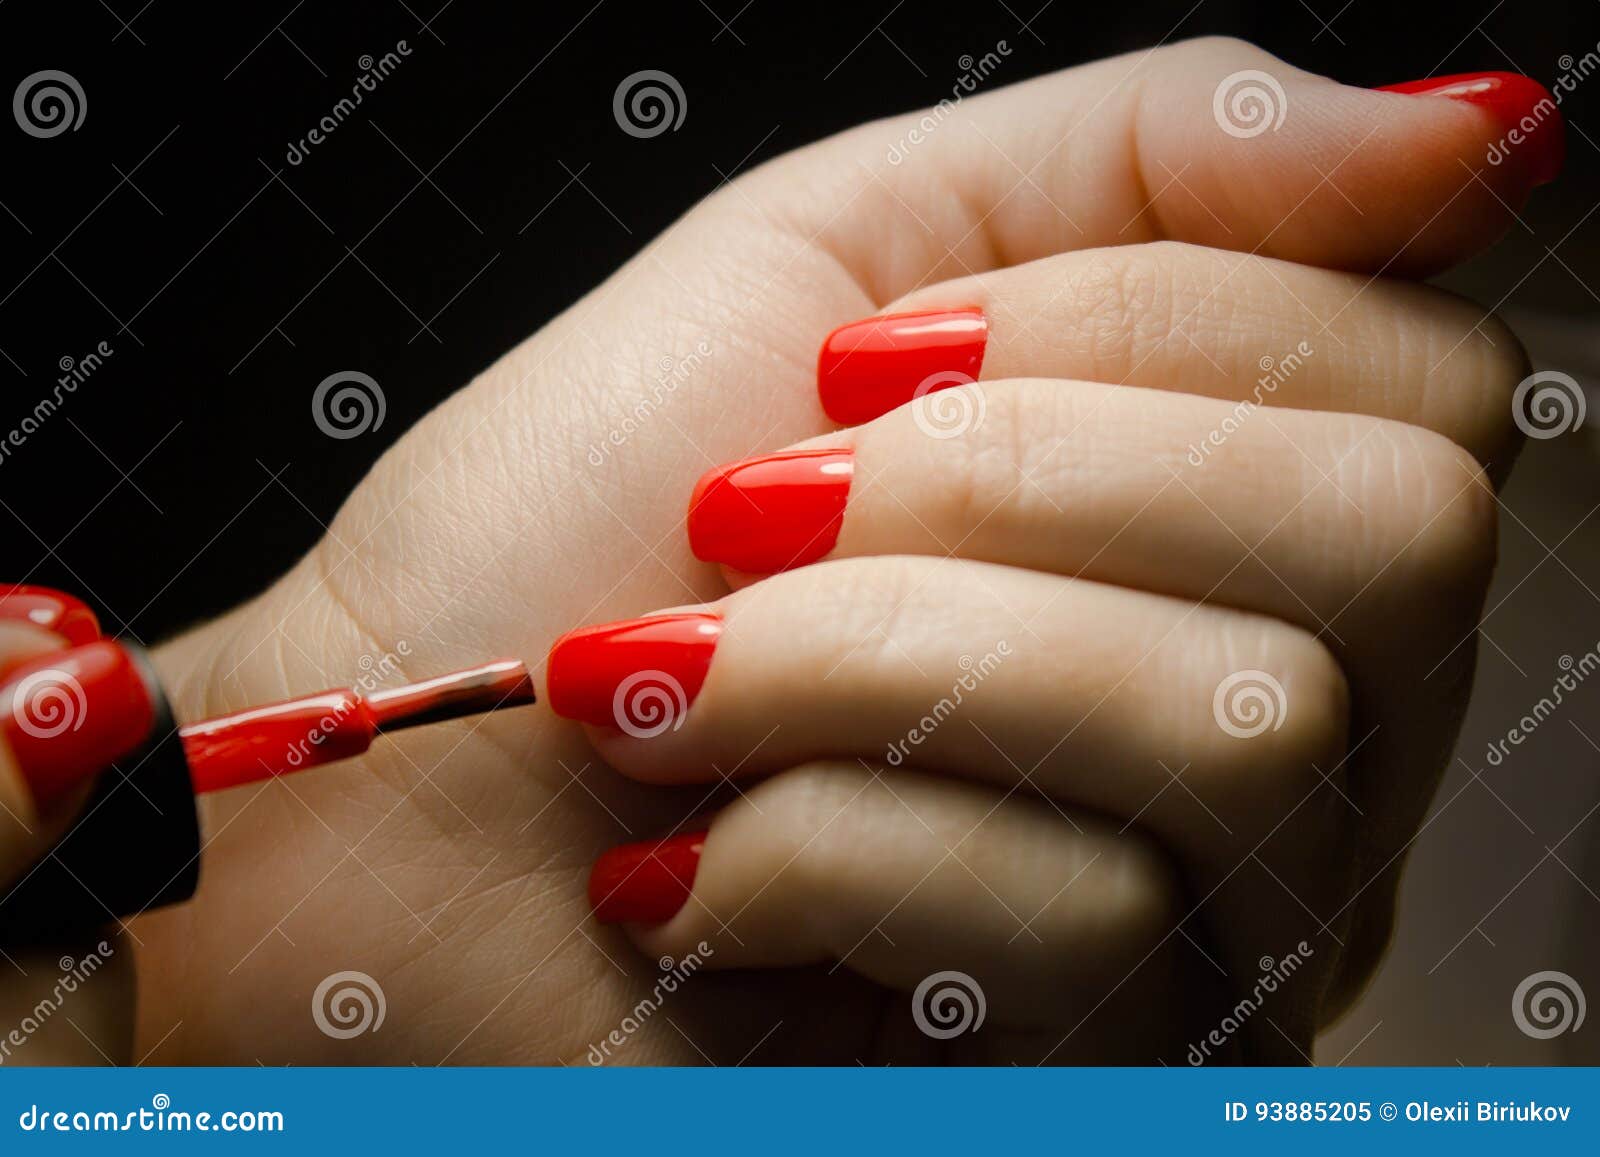 woman applying nail polish on her manicured nail carefully